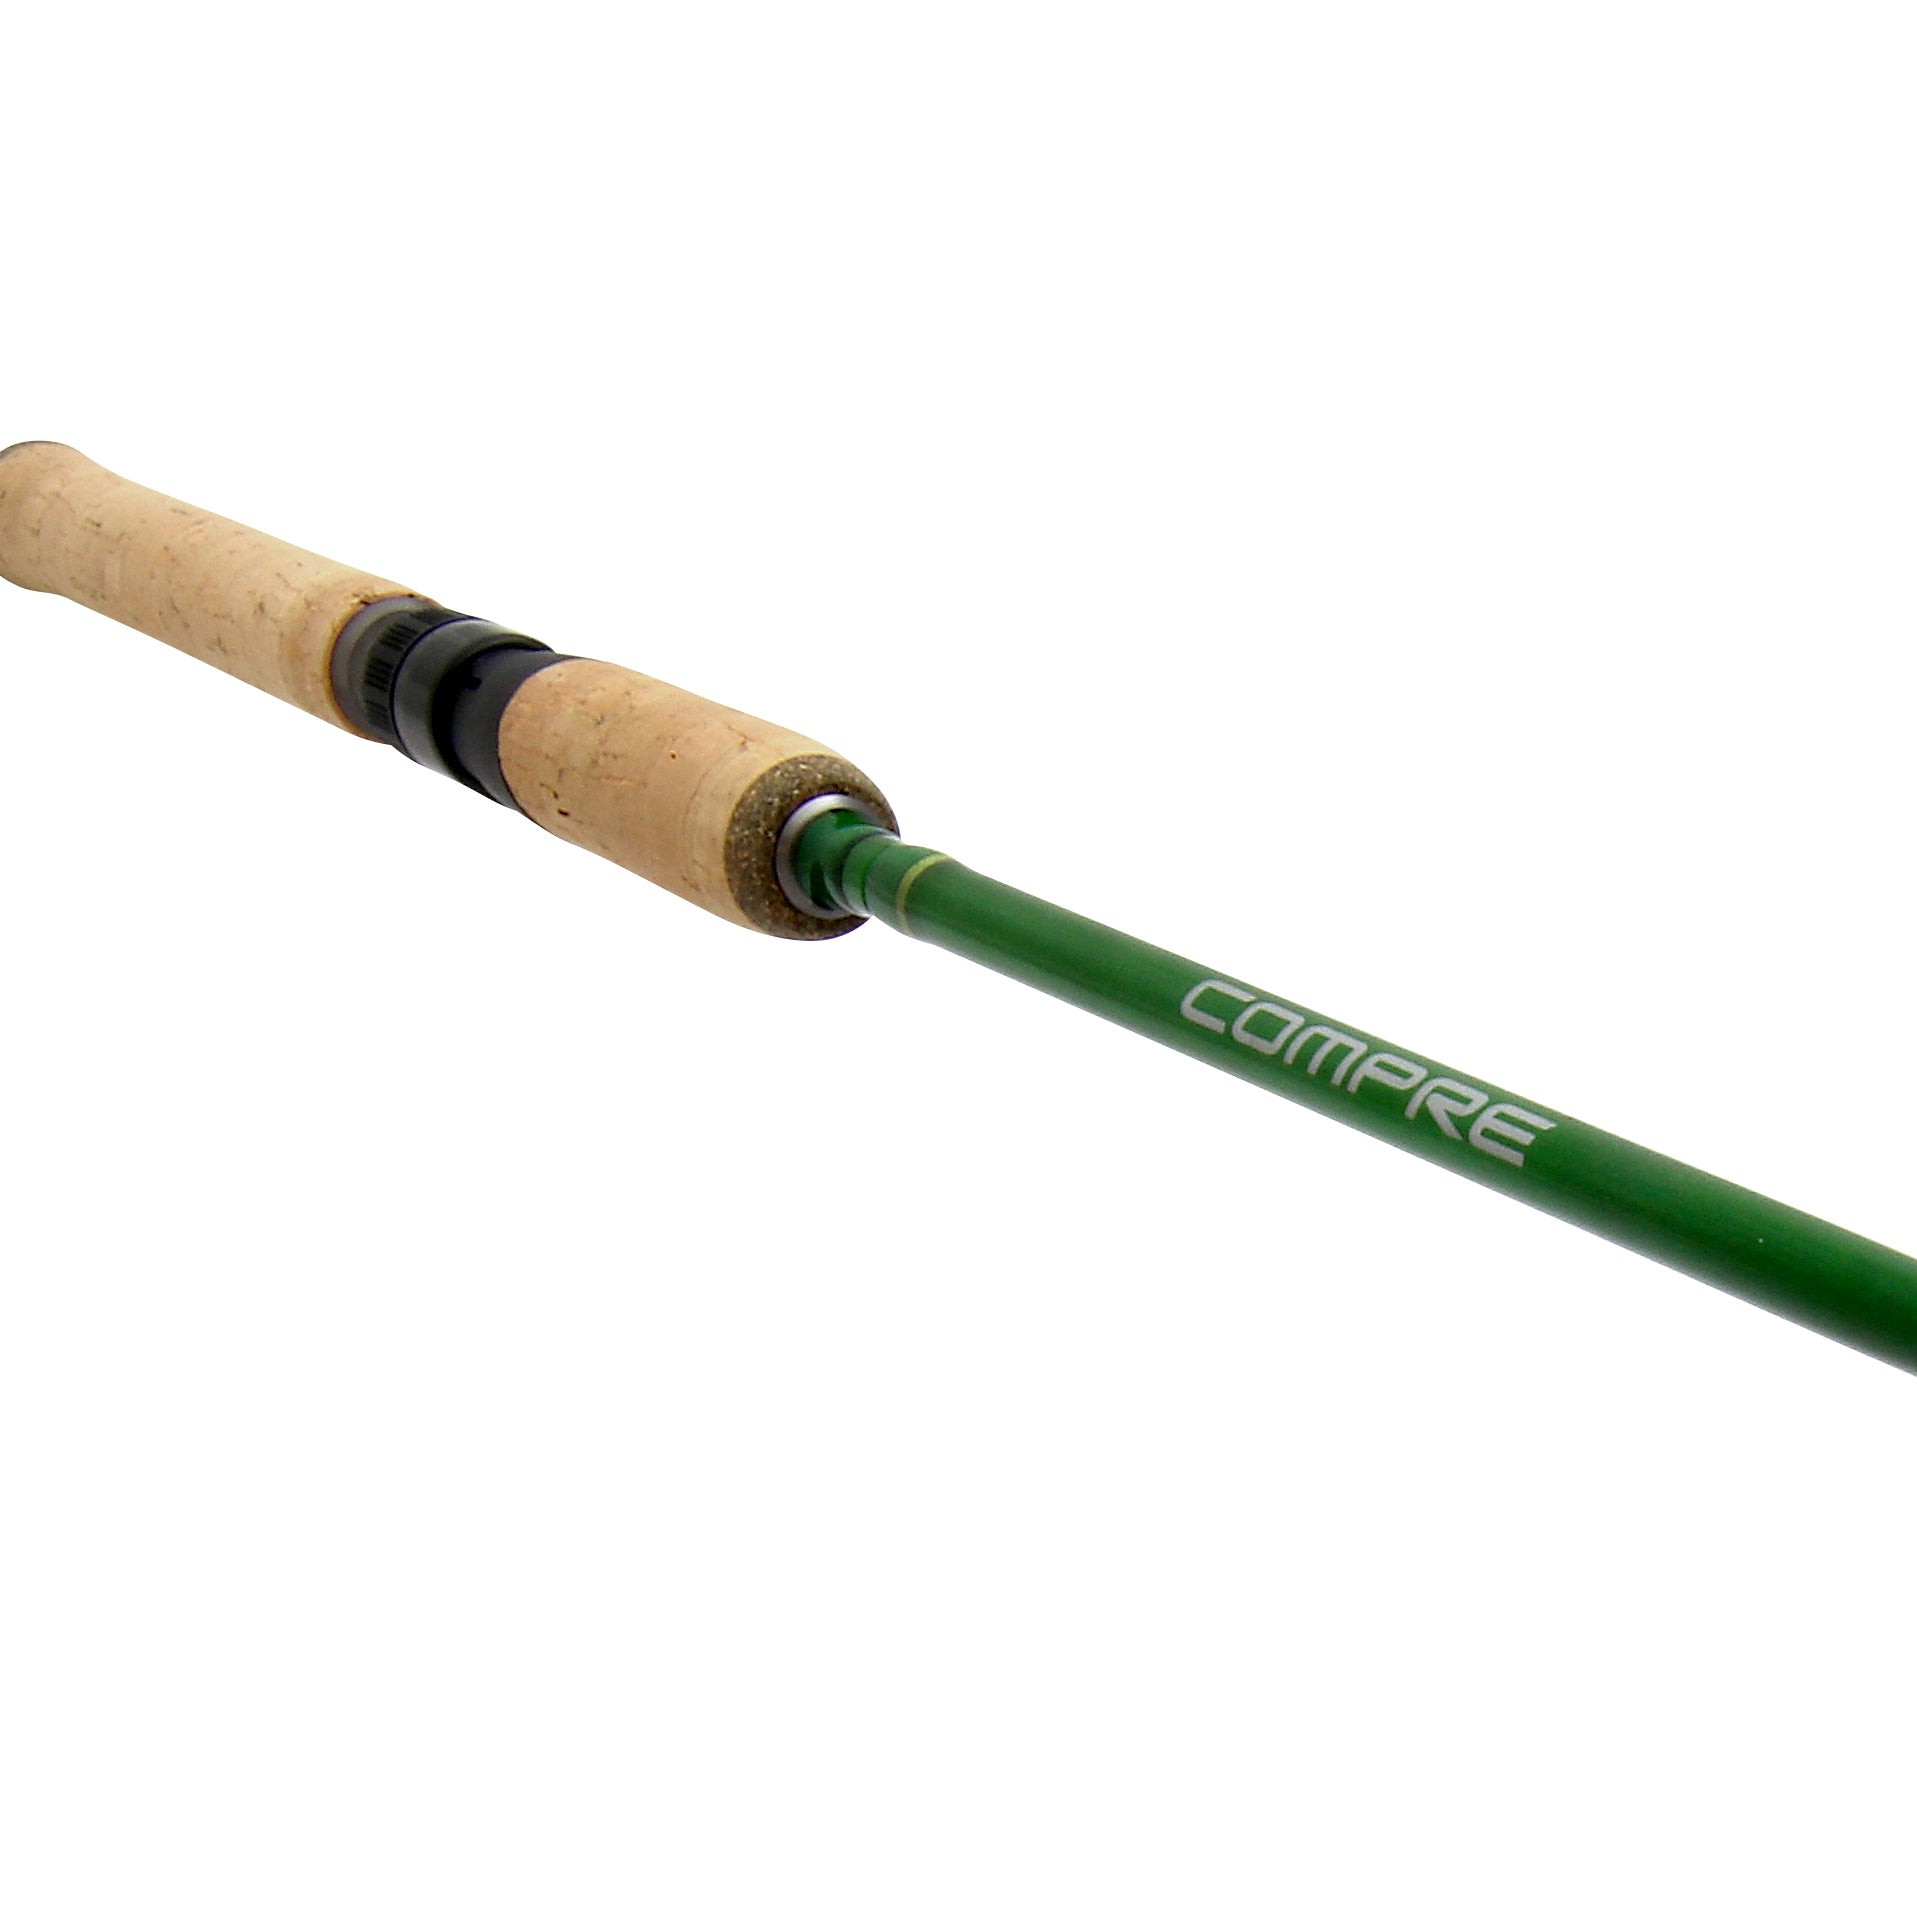 Shimano Compre Walleye D Spinning Rod CPSWX70MD